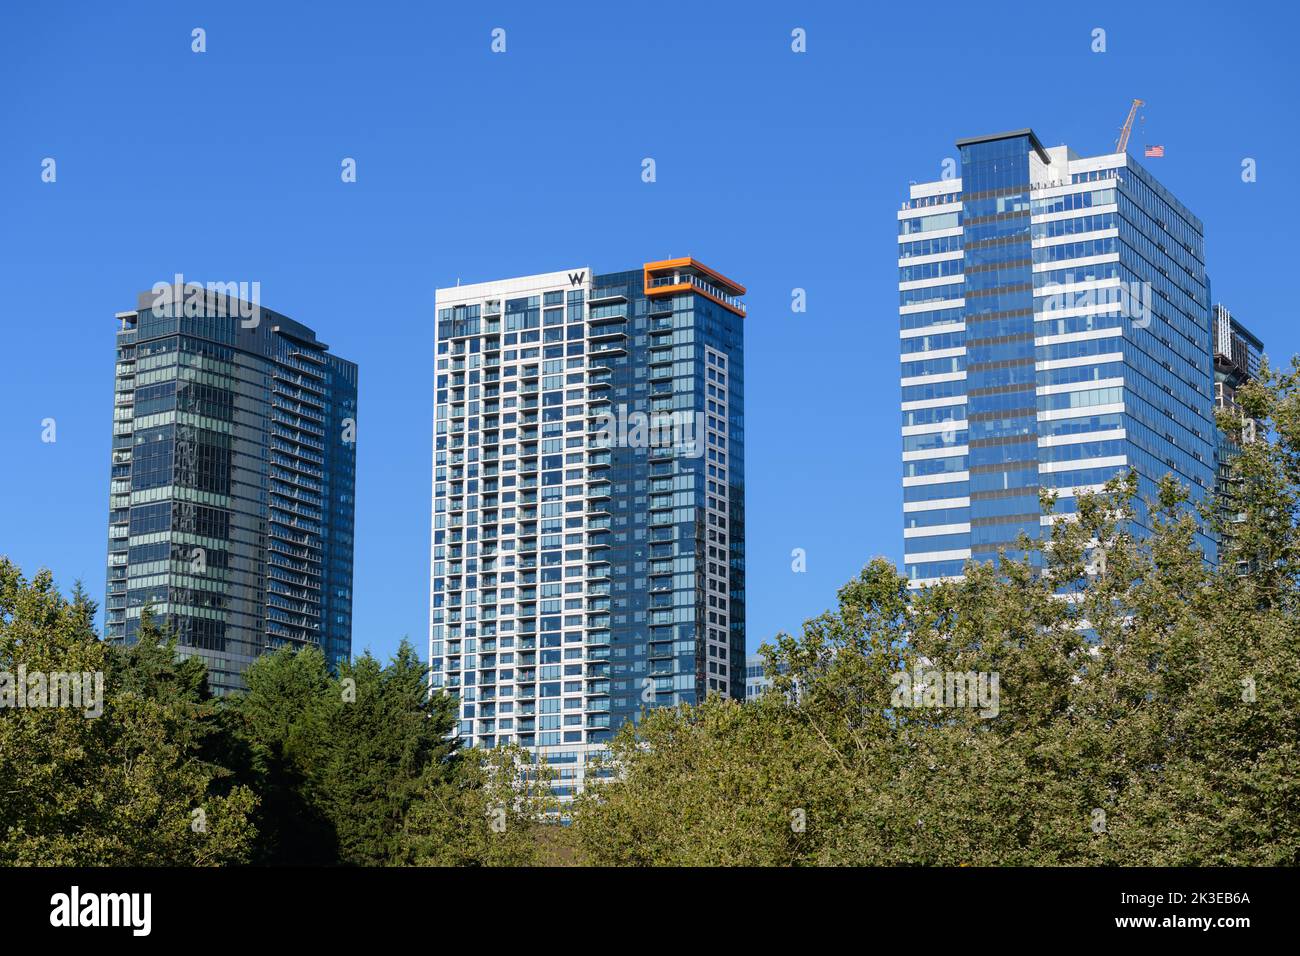 Bellevue, WA, USA - September 07, 2022; Mixed use skyscrapers in Bellevue including W and Westin hotel against blue sky with tree foliage foreground Stock Photo